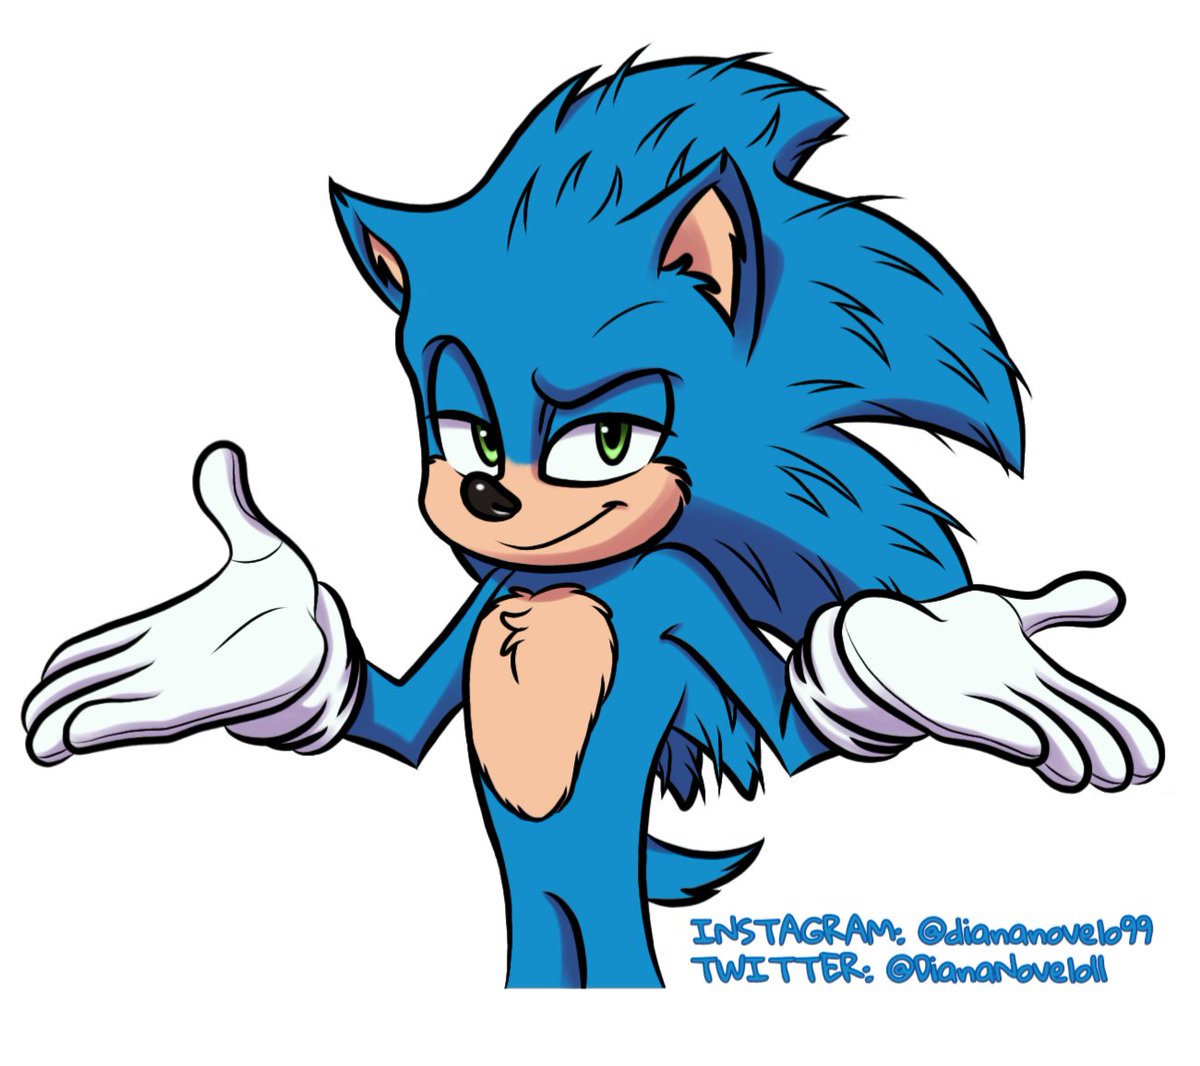 Here's a close-up to the drawings from my last redraw ⚫🔴🔵🟡

#SonicMovie3 #Sonic3 #SonicMovie #SonicTheHedgehog #sonicfanart #ShadowTheHedgehog #Knuckles #TailsTheFox #KnucklesTheEchidna